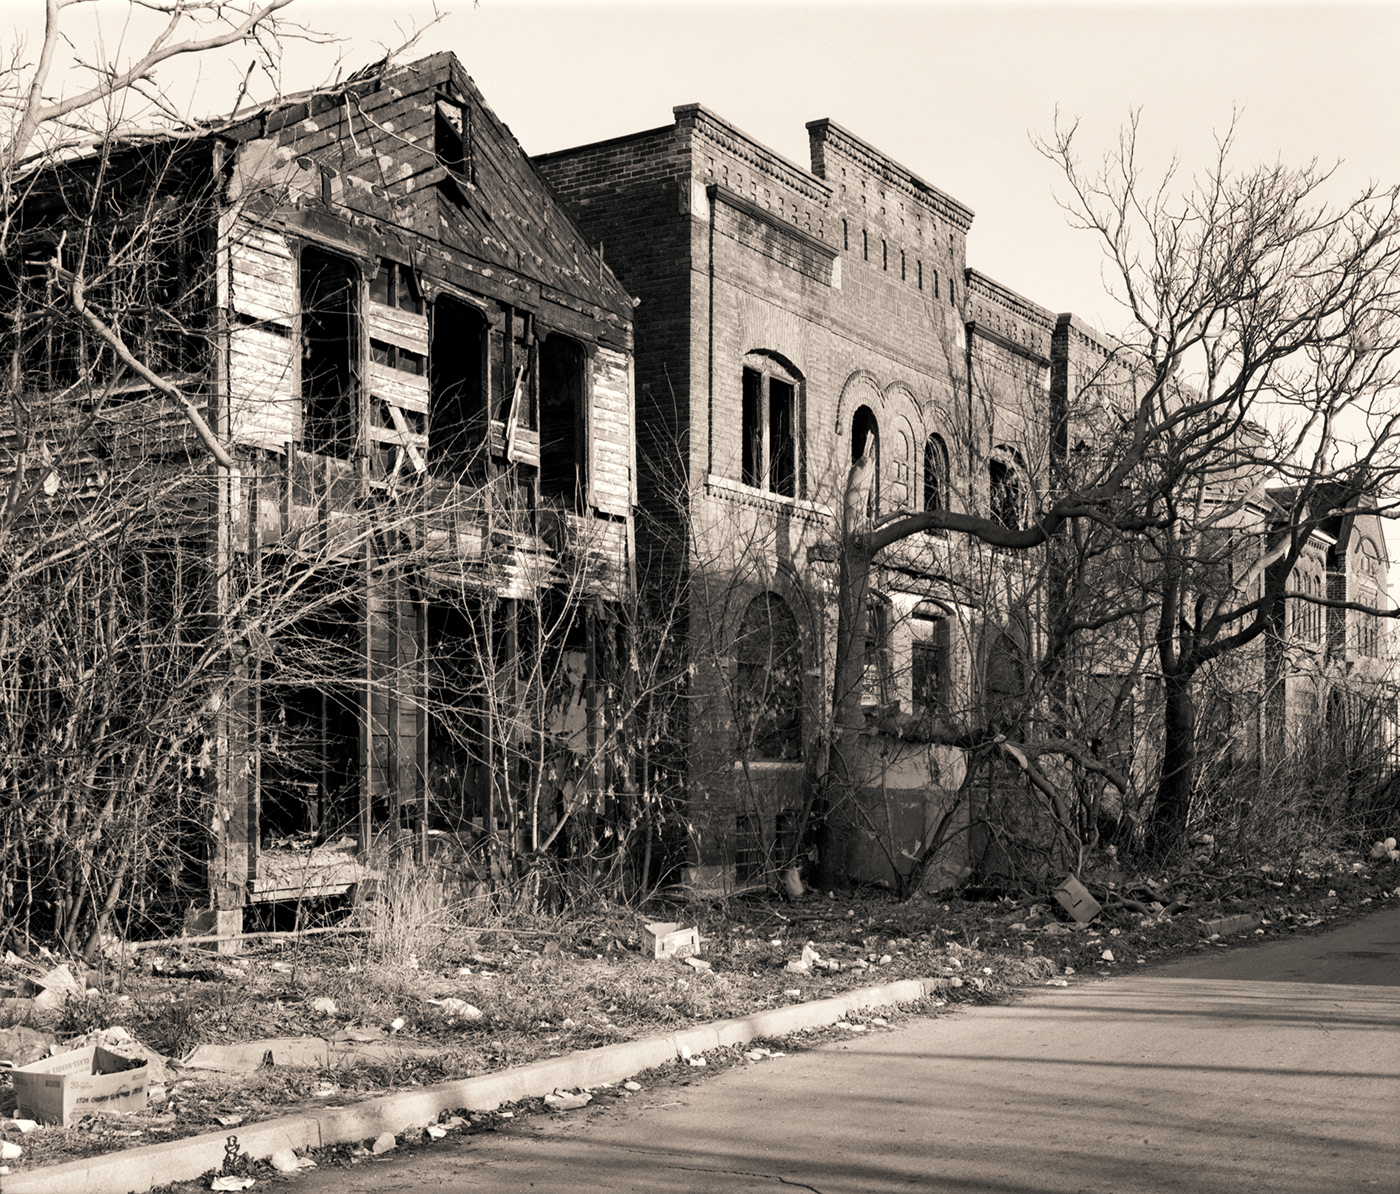 A row of abandoned houses in Detroit, Michigan.